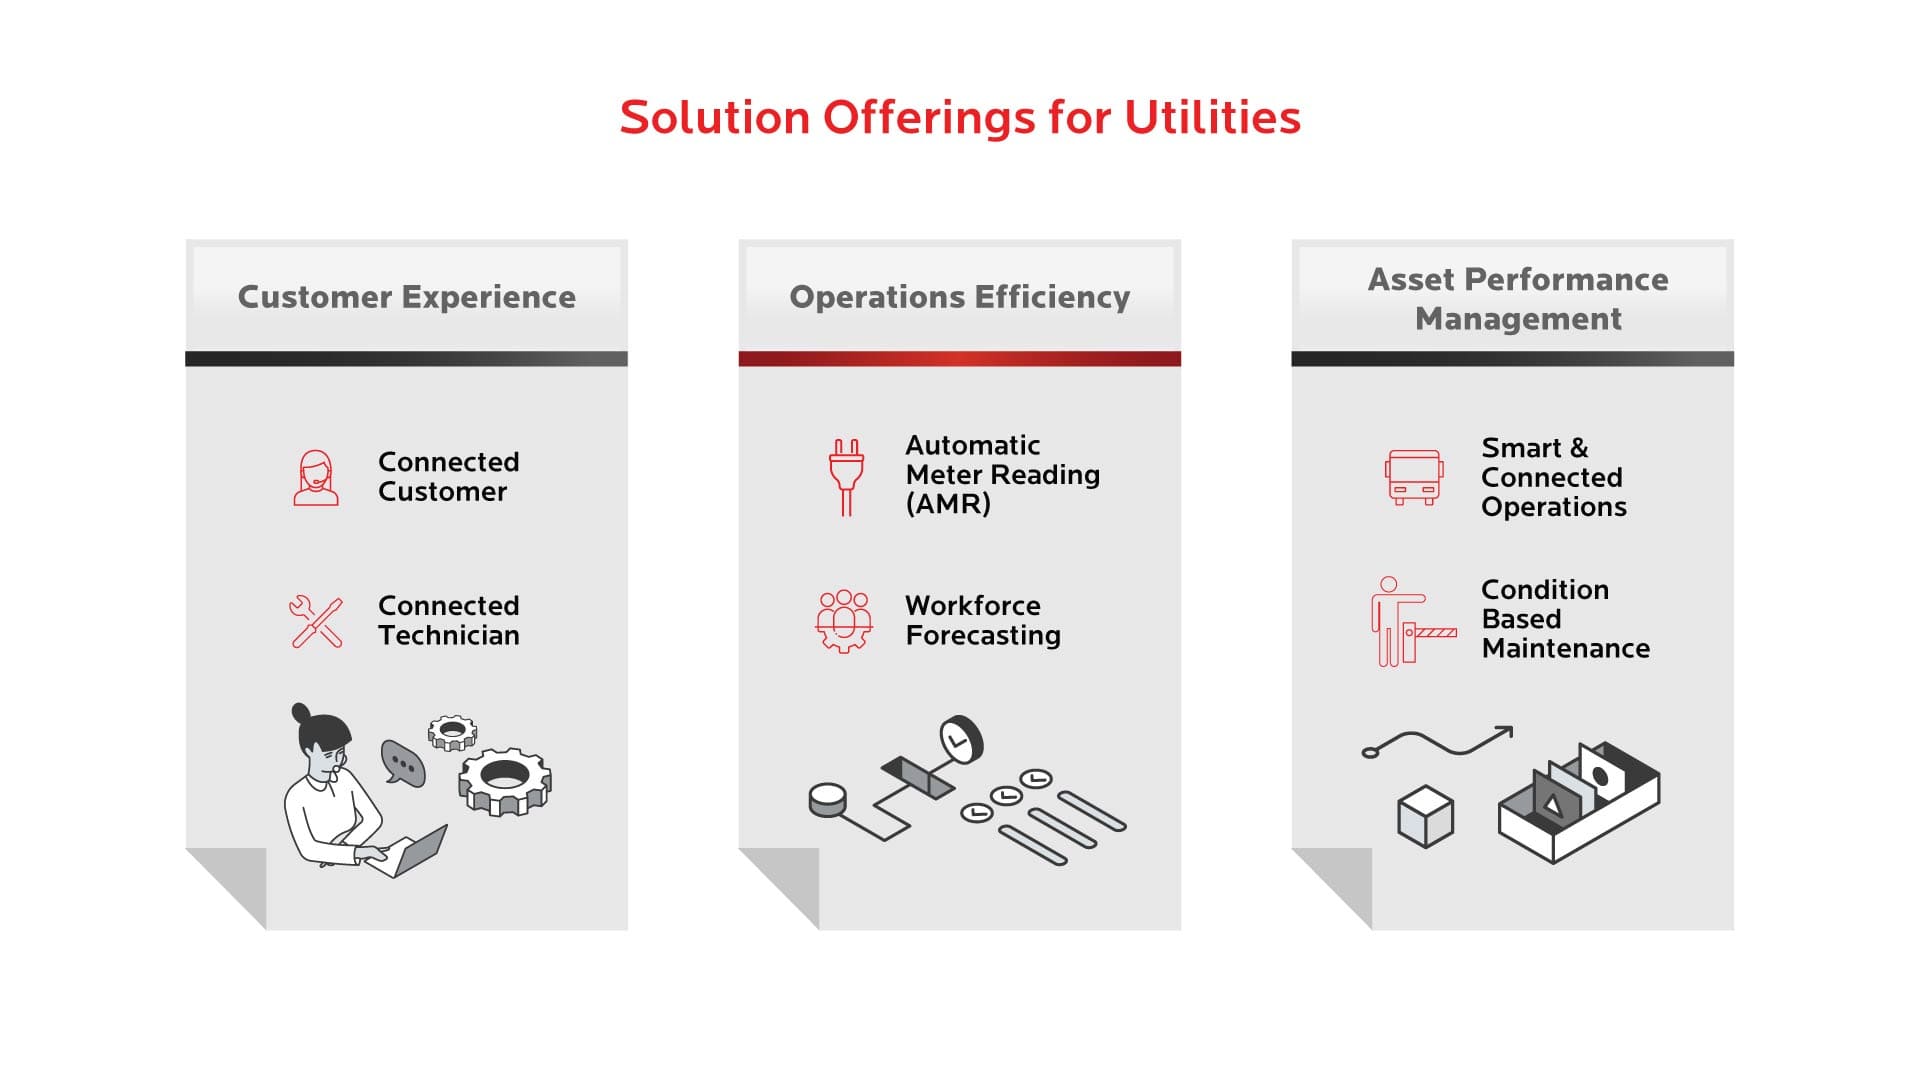 Solution Offerings for Utilities